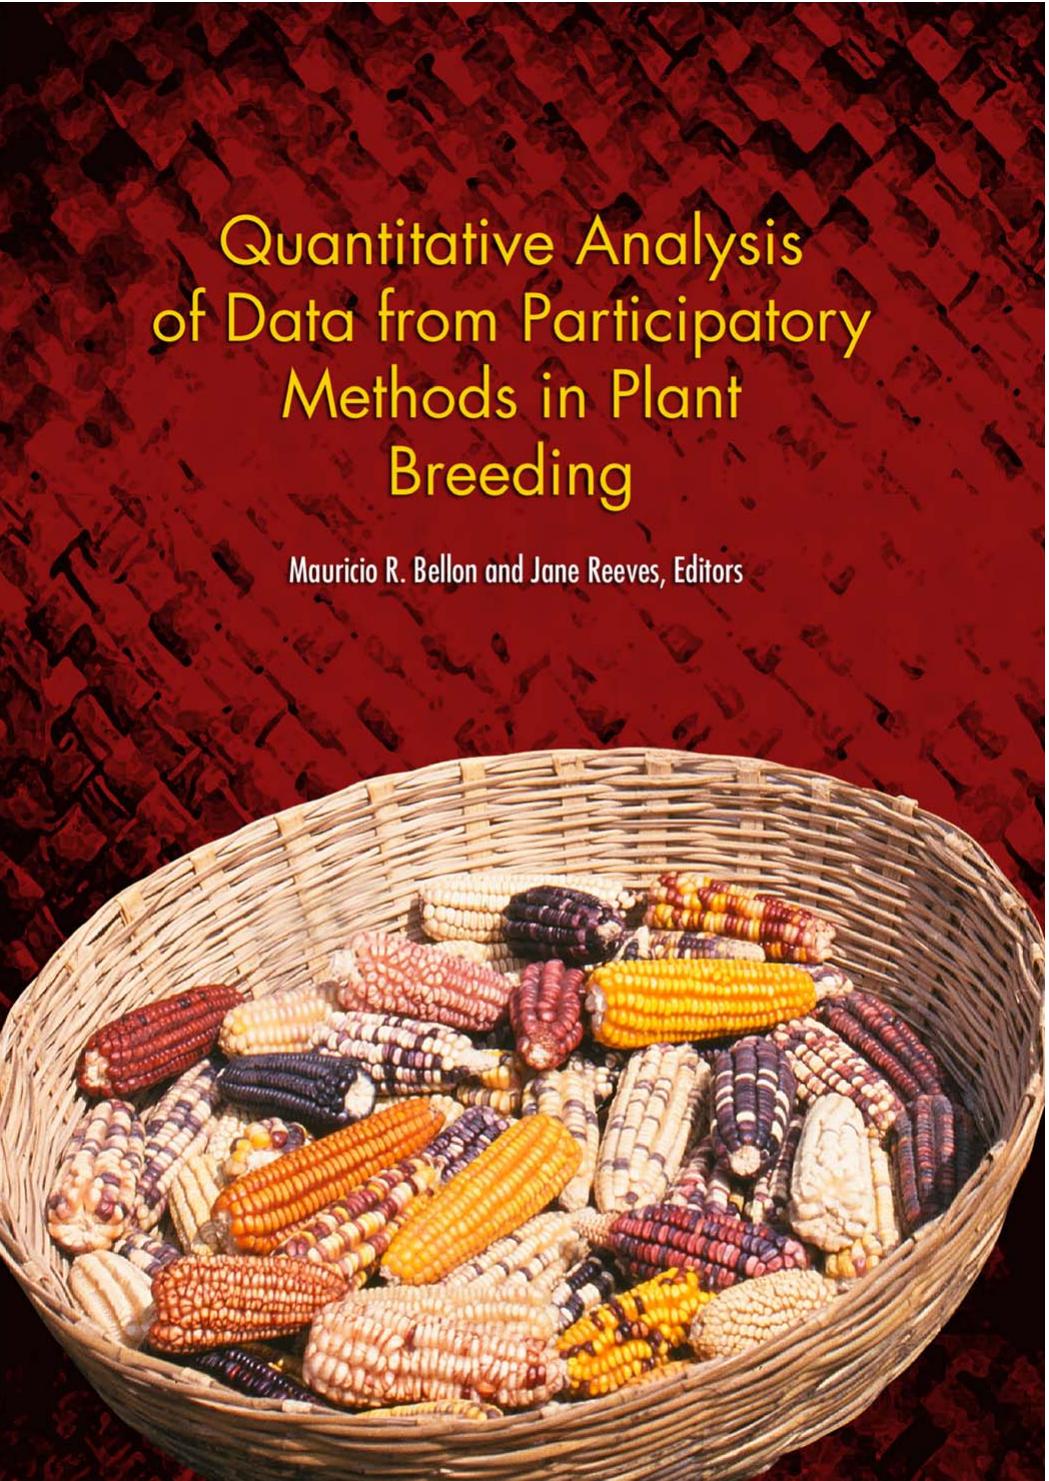 Quantitative Analysis of Data from Participatory Methods in Plant Breeding